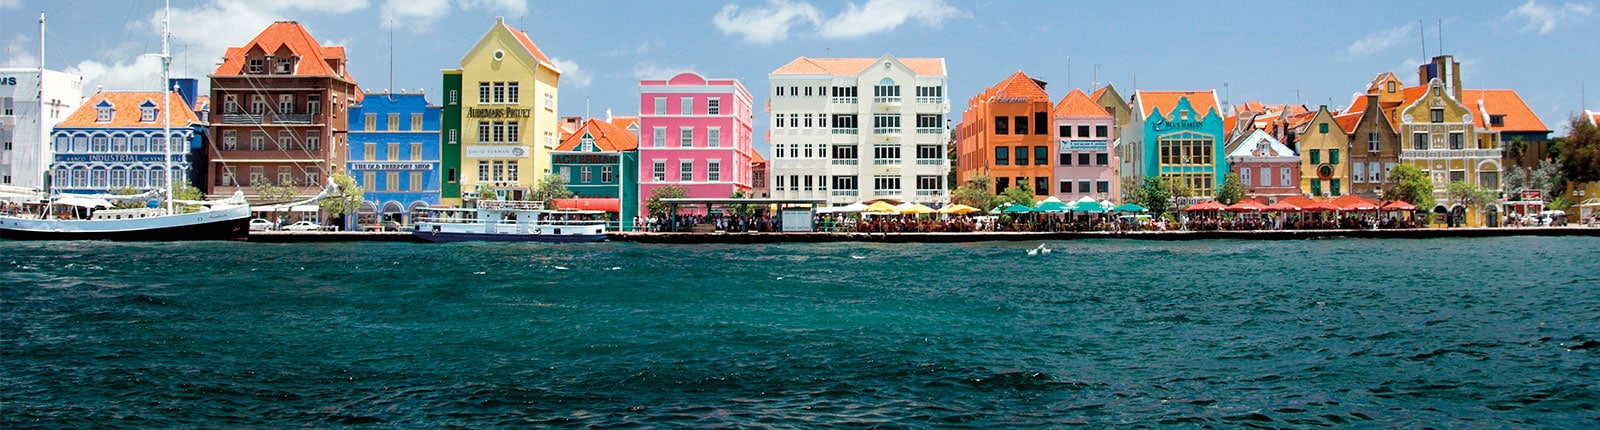 Colorful buildings alongside the waterfront in Curacao